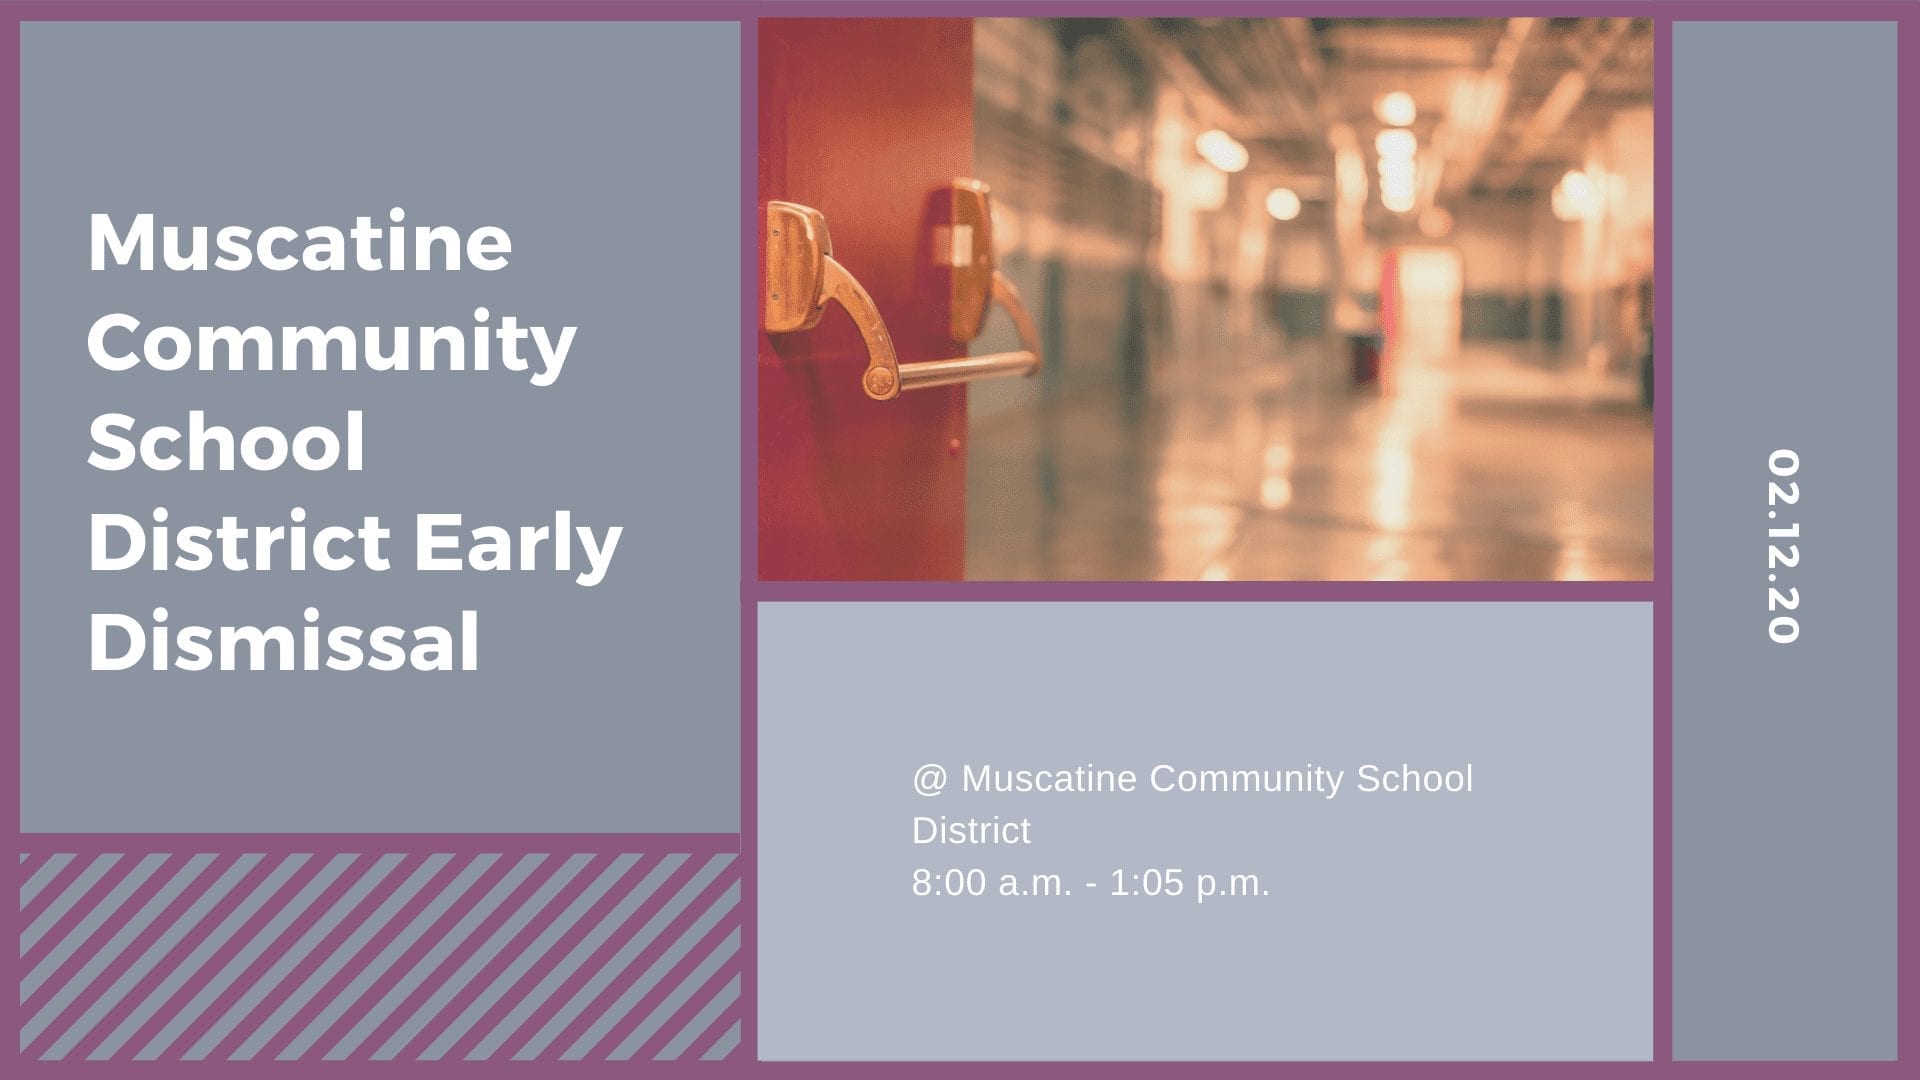 Muscatine Community School District Early Dismissal